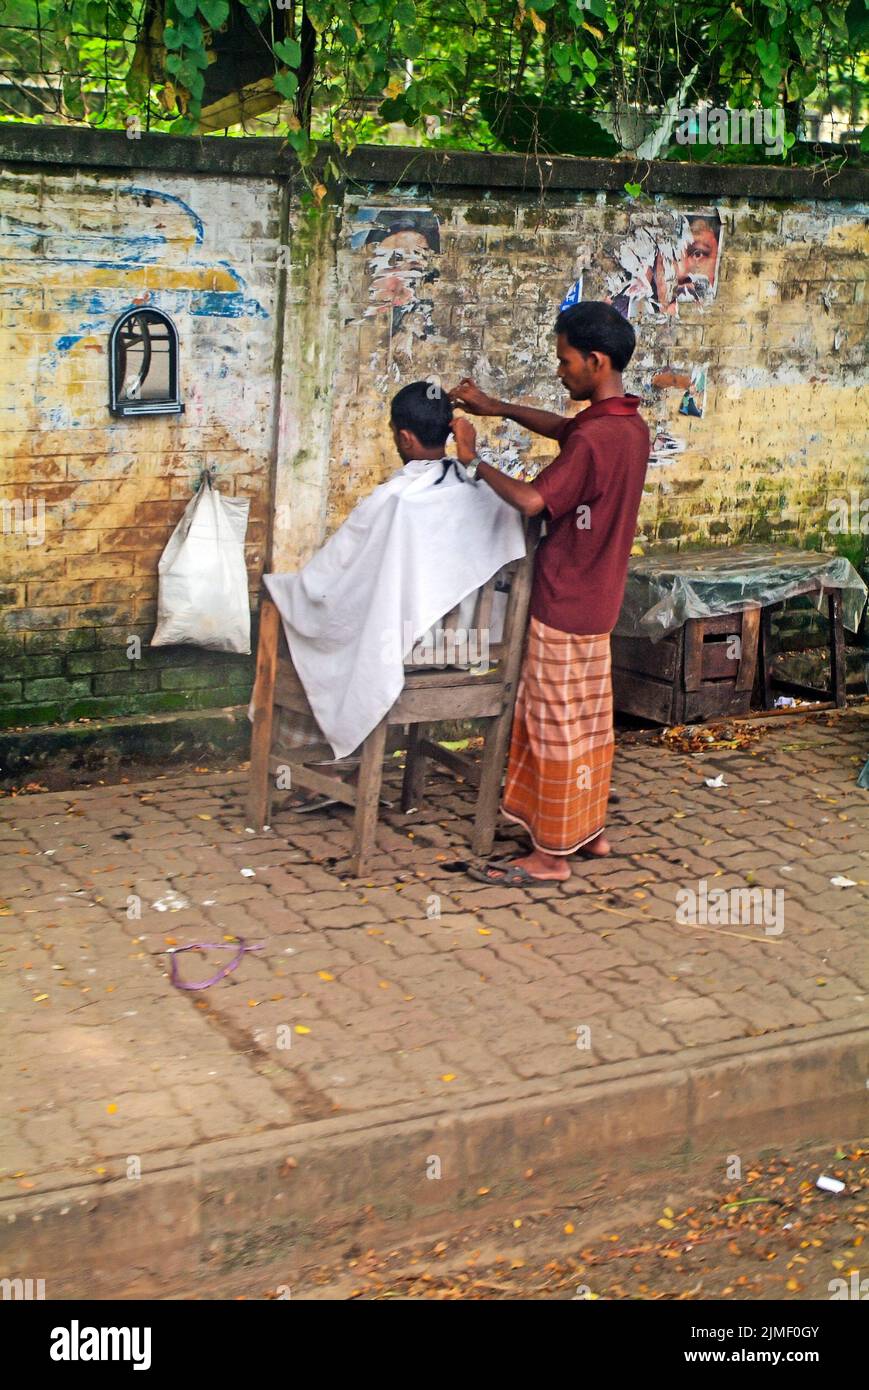 Dhaka, Bangladesh - September 17, 2007: Unidentified hairdresser cuts customers' hair on the sidewalk, an alternative for the poorer population Stock Photo